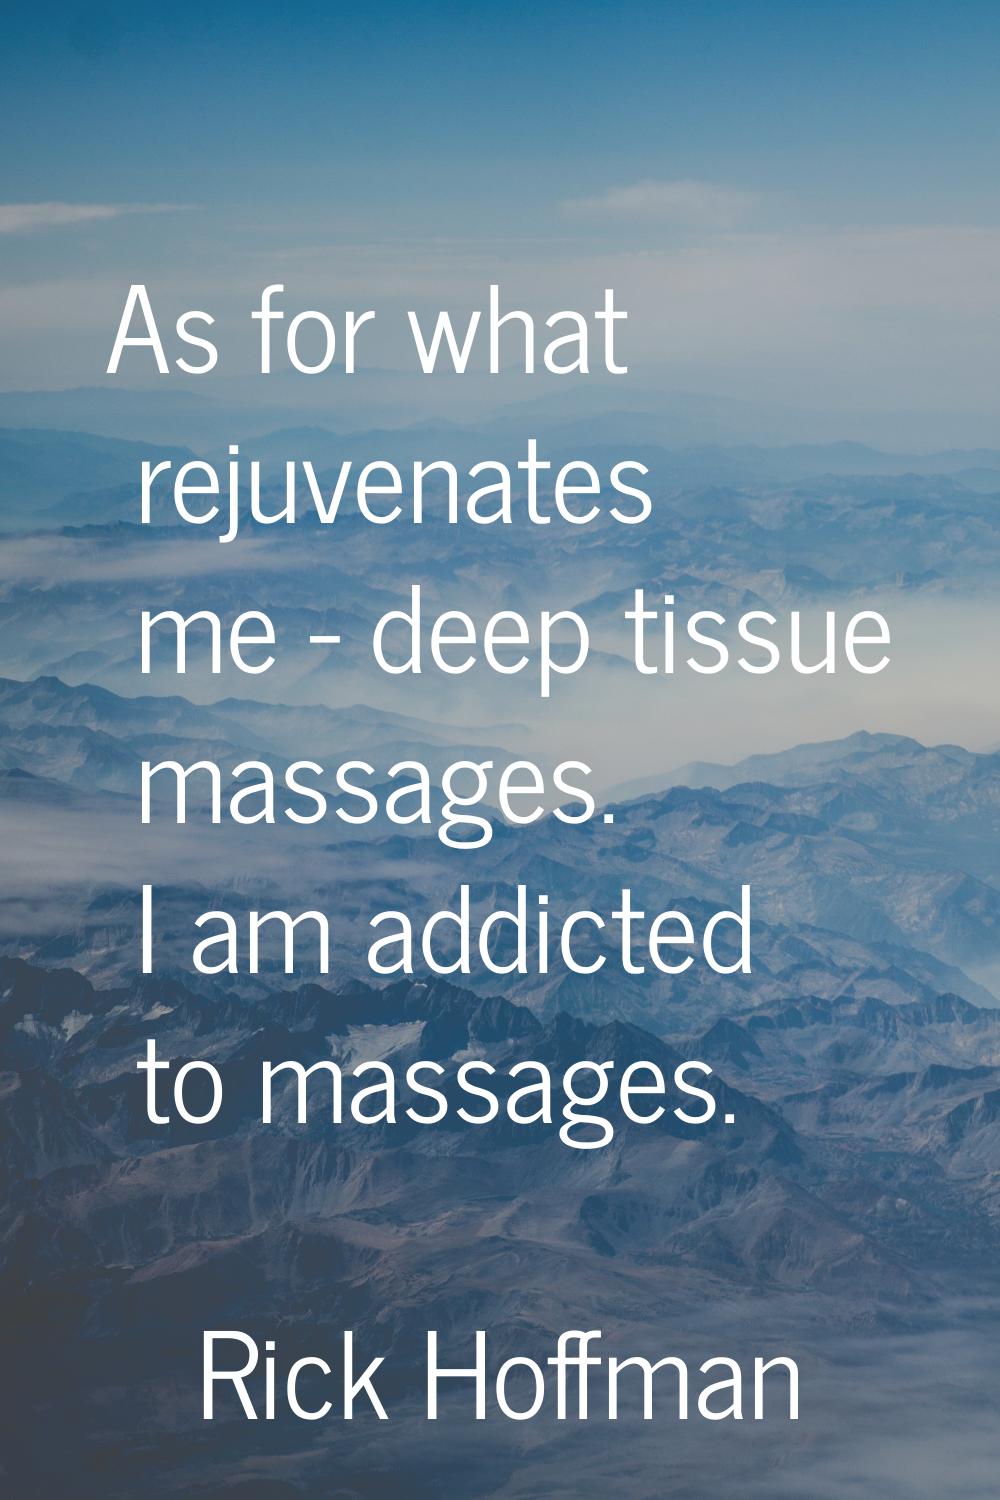 As for what rejuvenates me - deep tissue massages. I am addicted to massages.